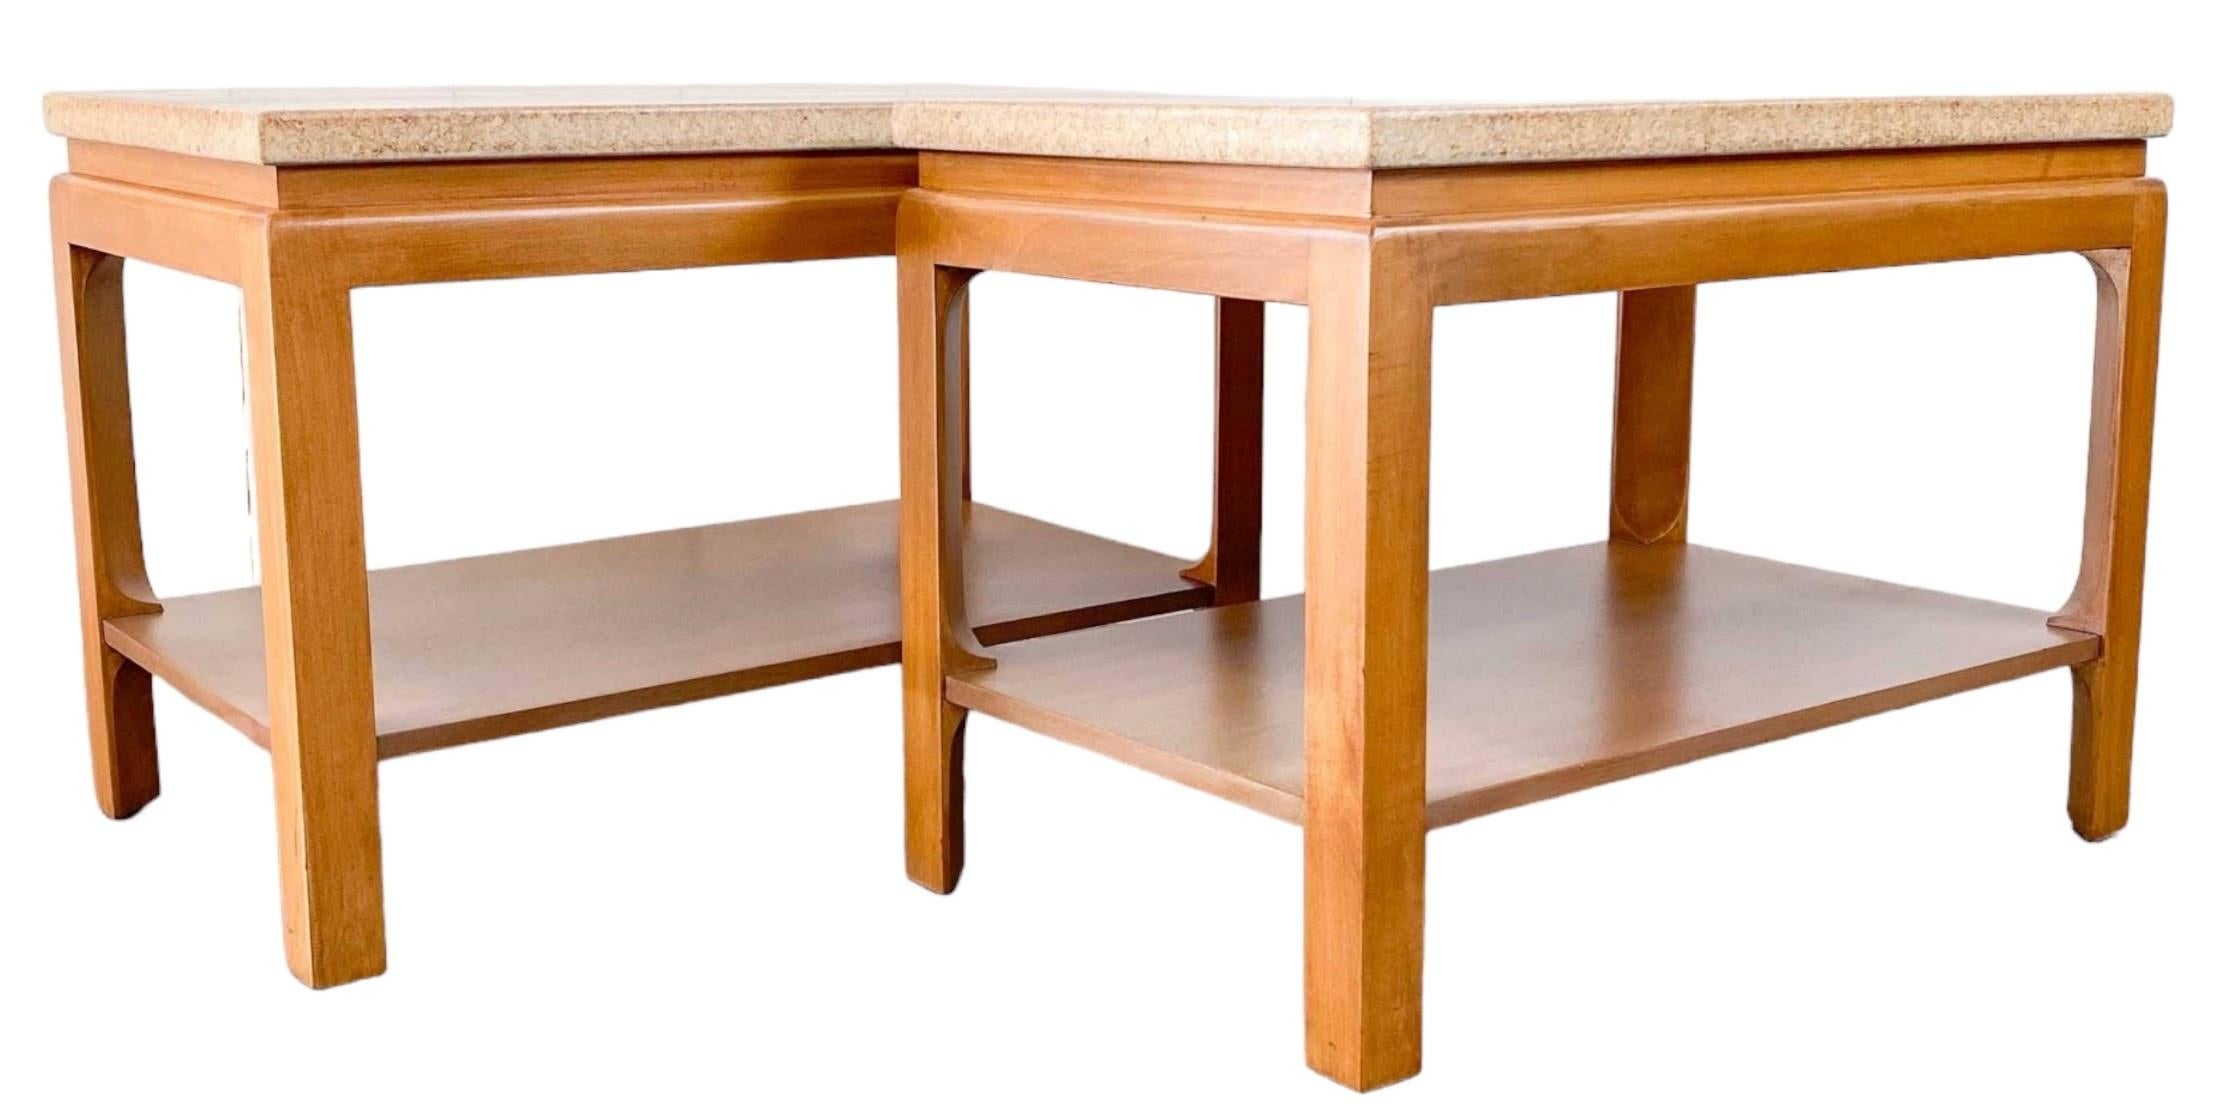 Pair of Paul T. Frankl for Johnson Cork Top Two Tier Side or End Tables, 1950s For Sale 1